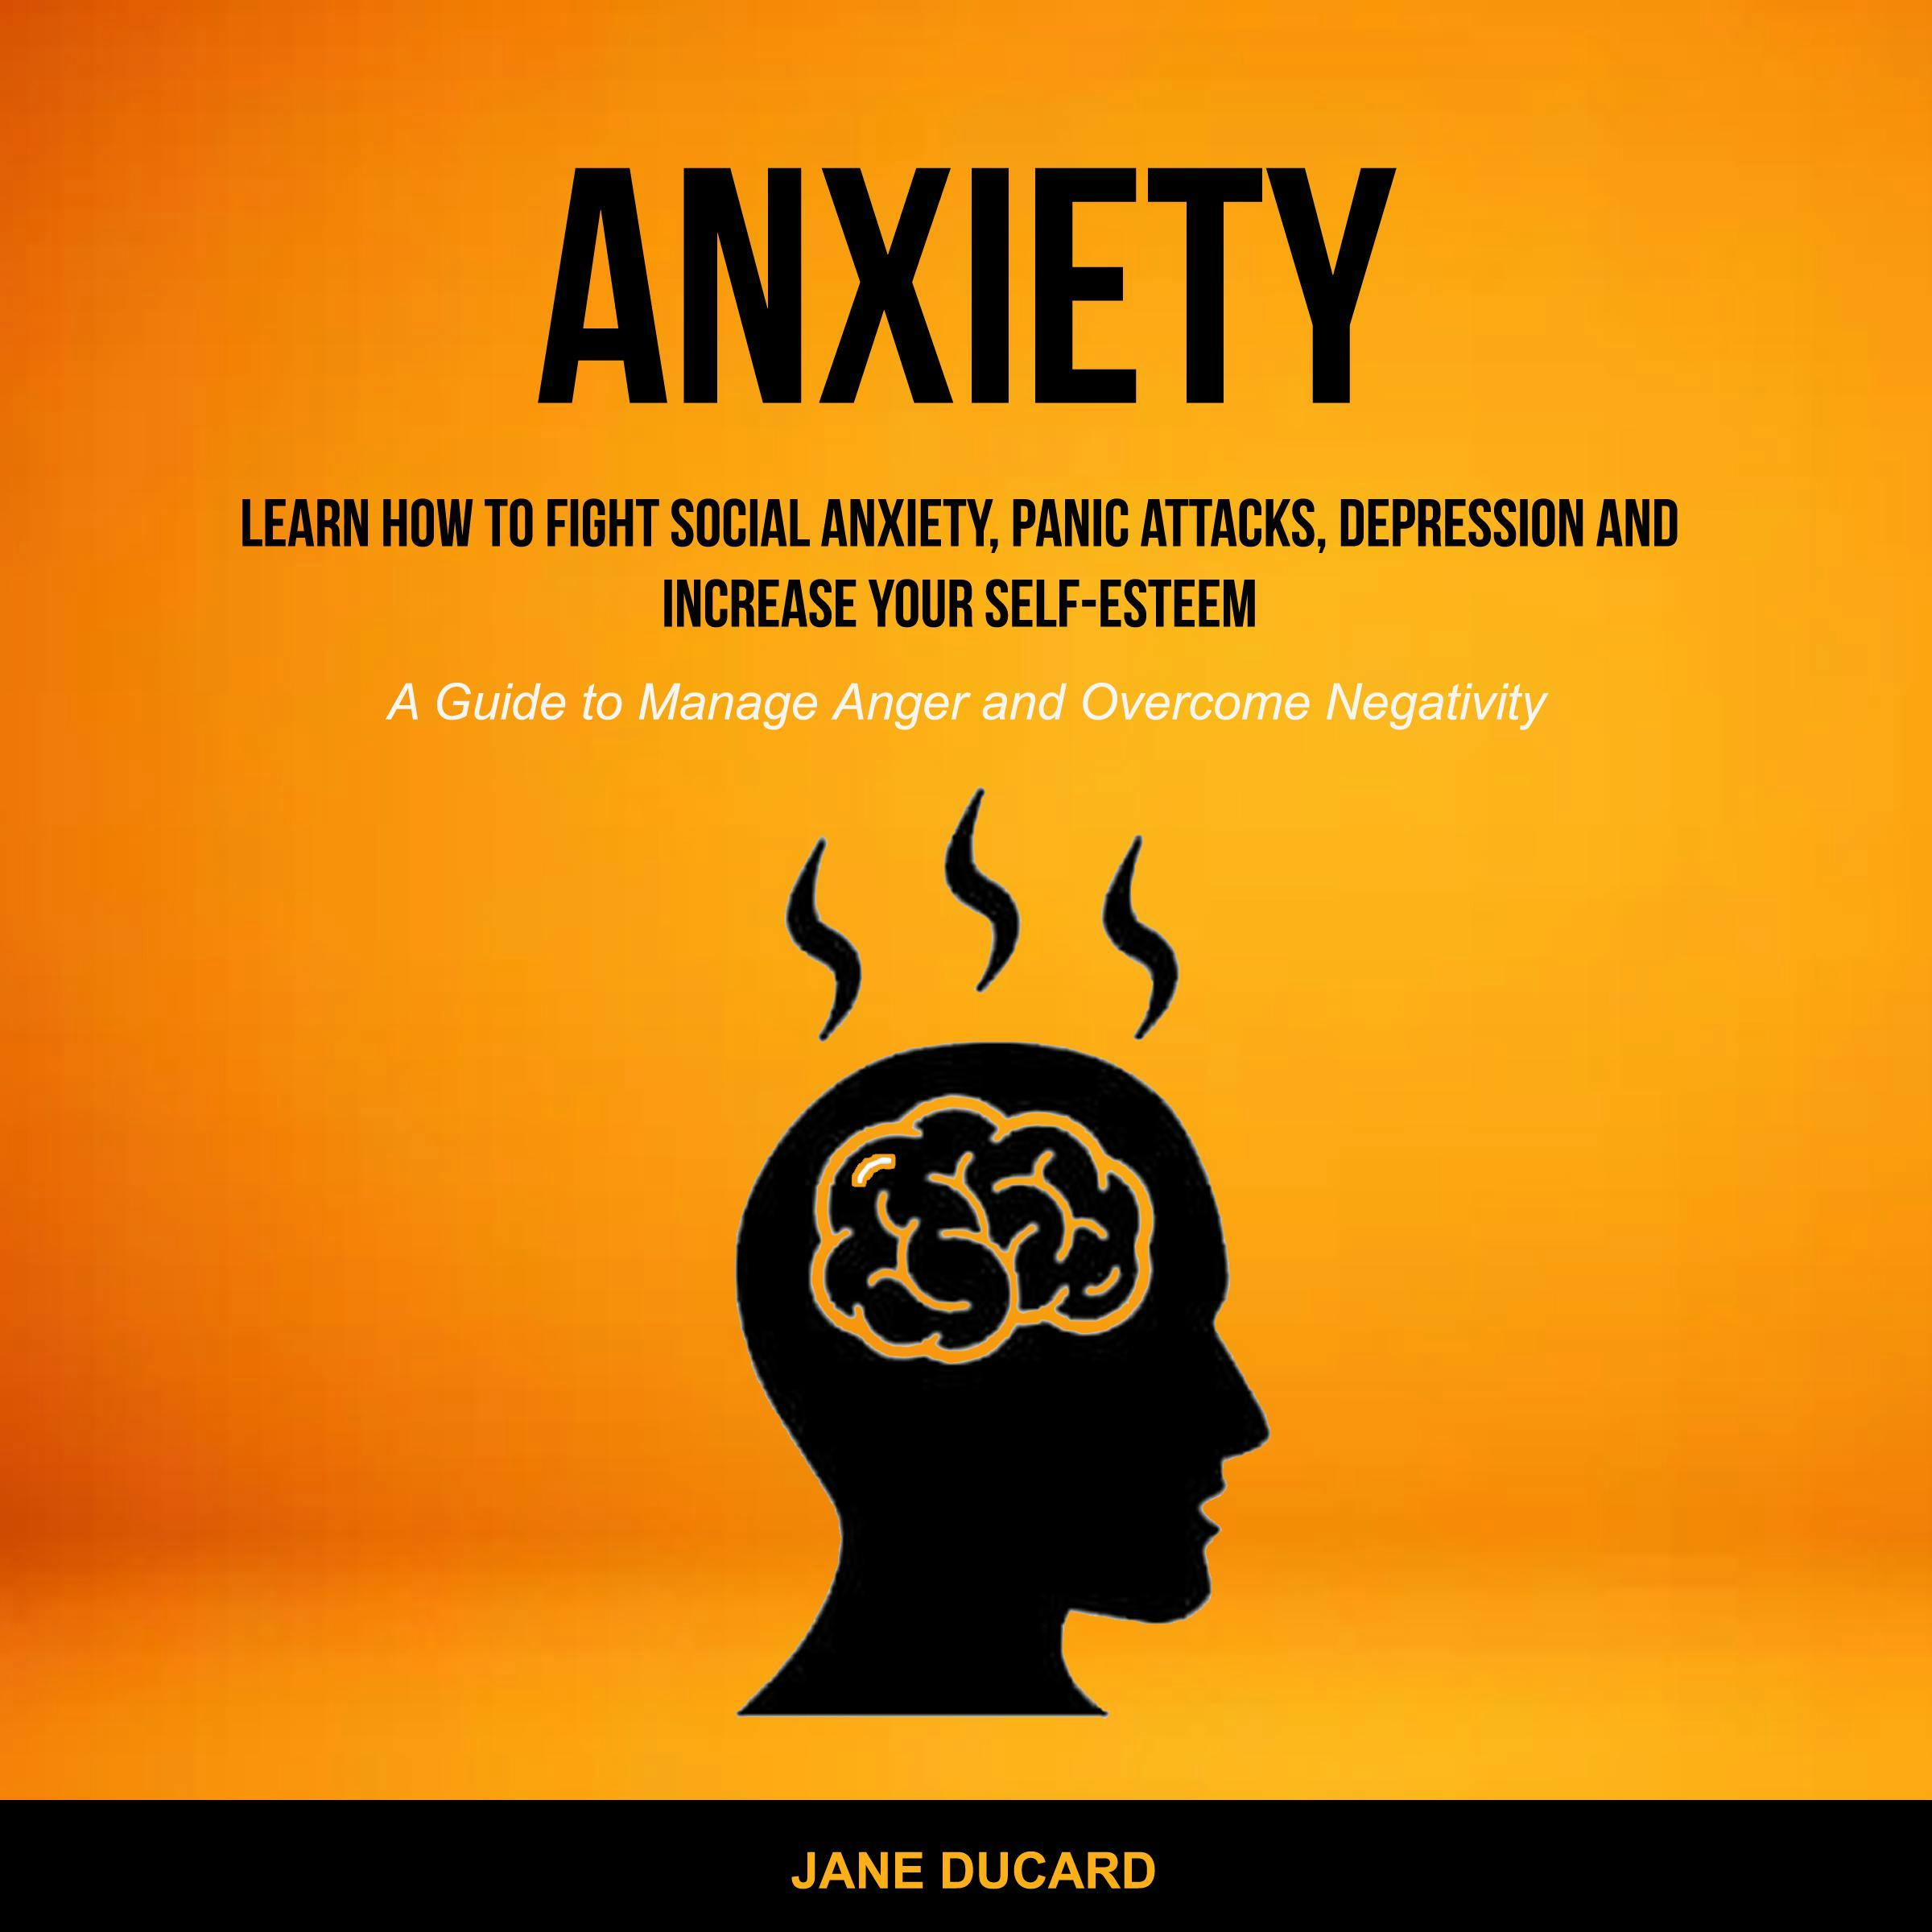 Anxiety: Learn How To Fight Social Anxiety, Panic Attacks, Depression And Increase Your Self-Esteem (A Guide to Manage Anger and Overcome Negativity) - Jane Ducard